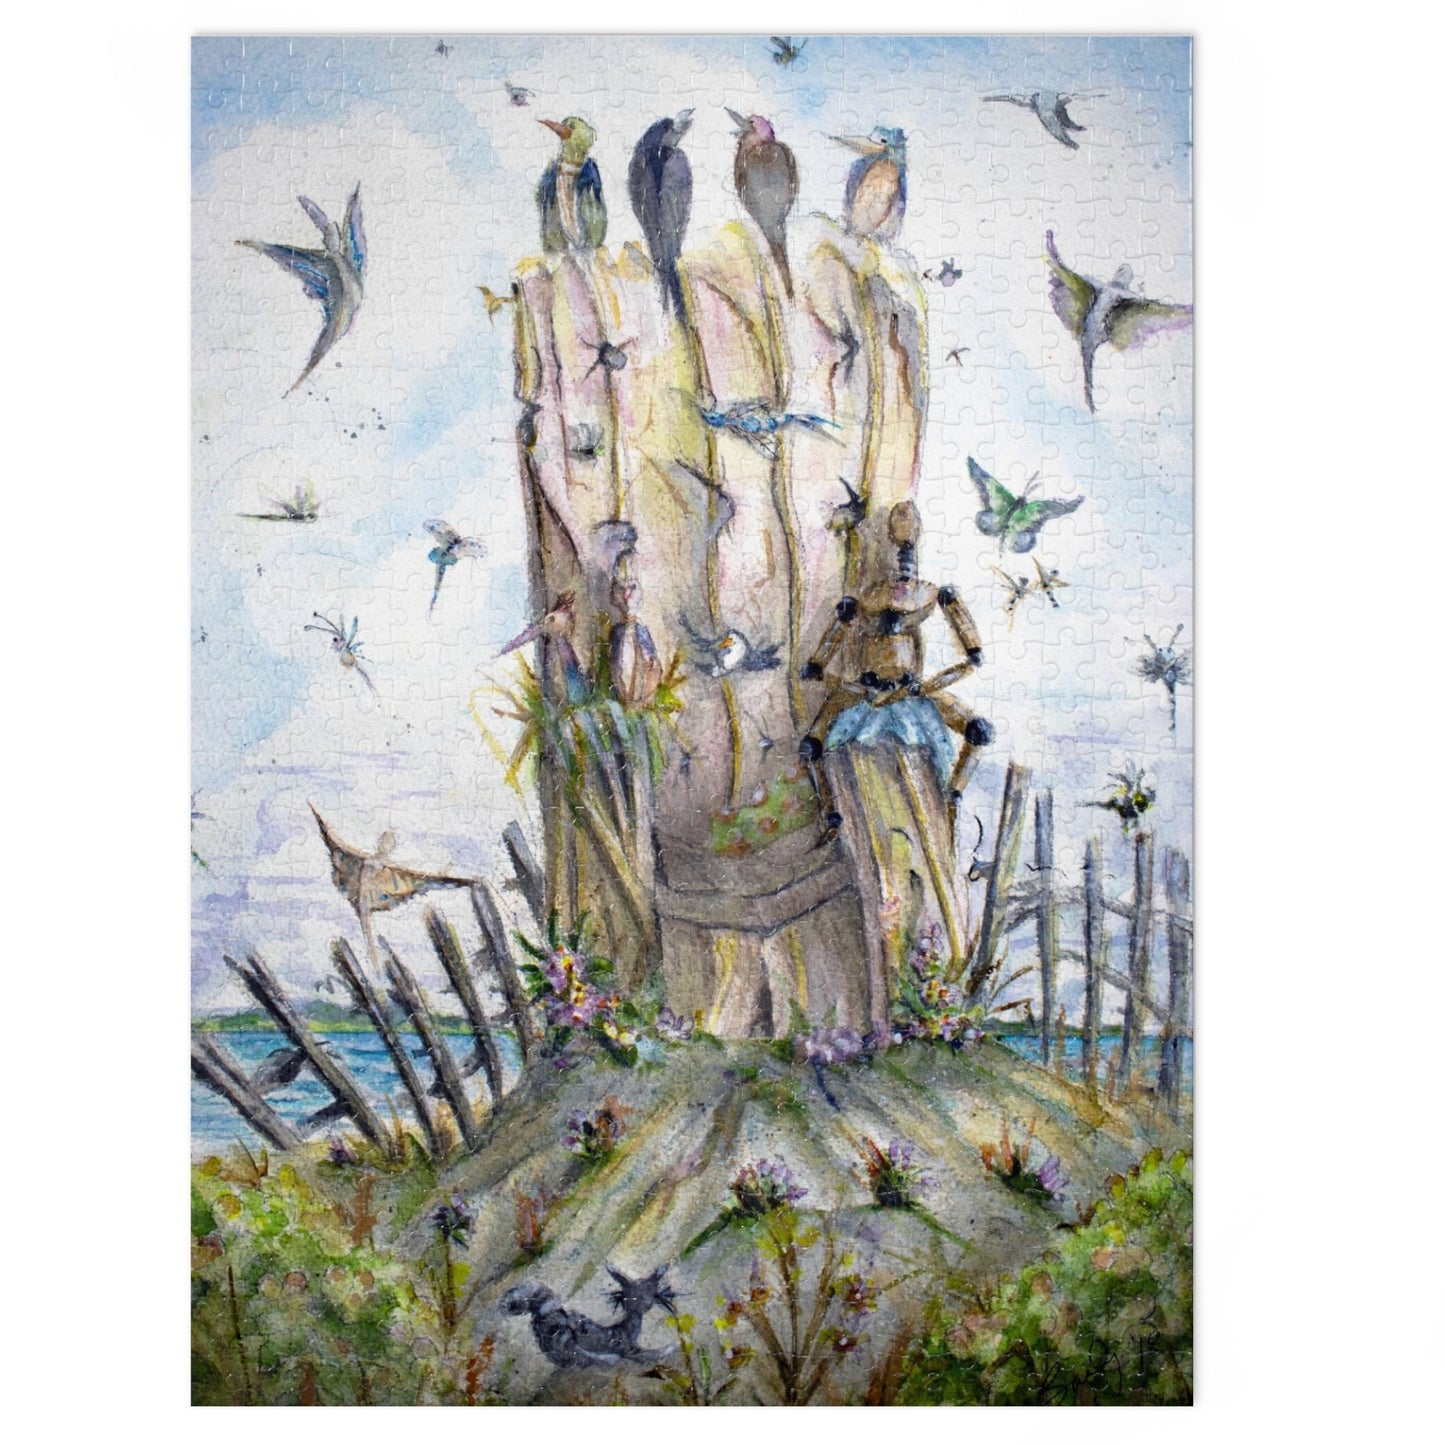 Meeting Place - Premium Art Jigsaw Puzzle - Satin-Finish Chipboard, Multiple Sizes Available